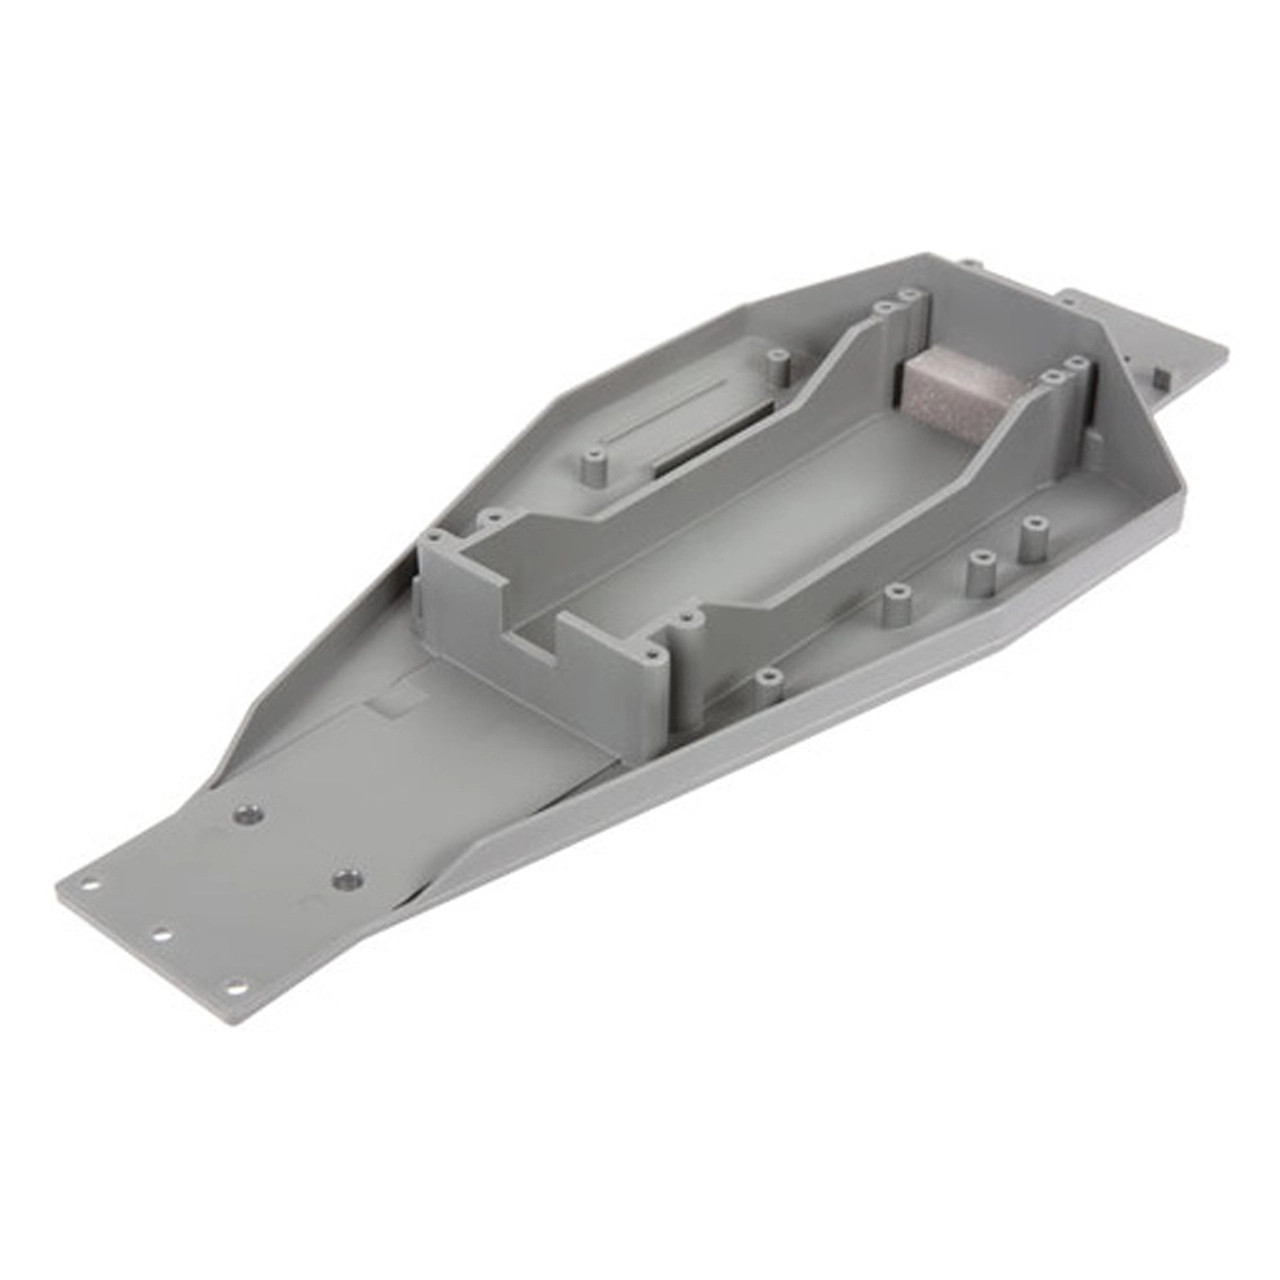 Traxxas 3728A Lower Chassis, Gray, 166mm long battery compartment